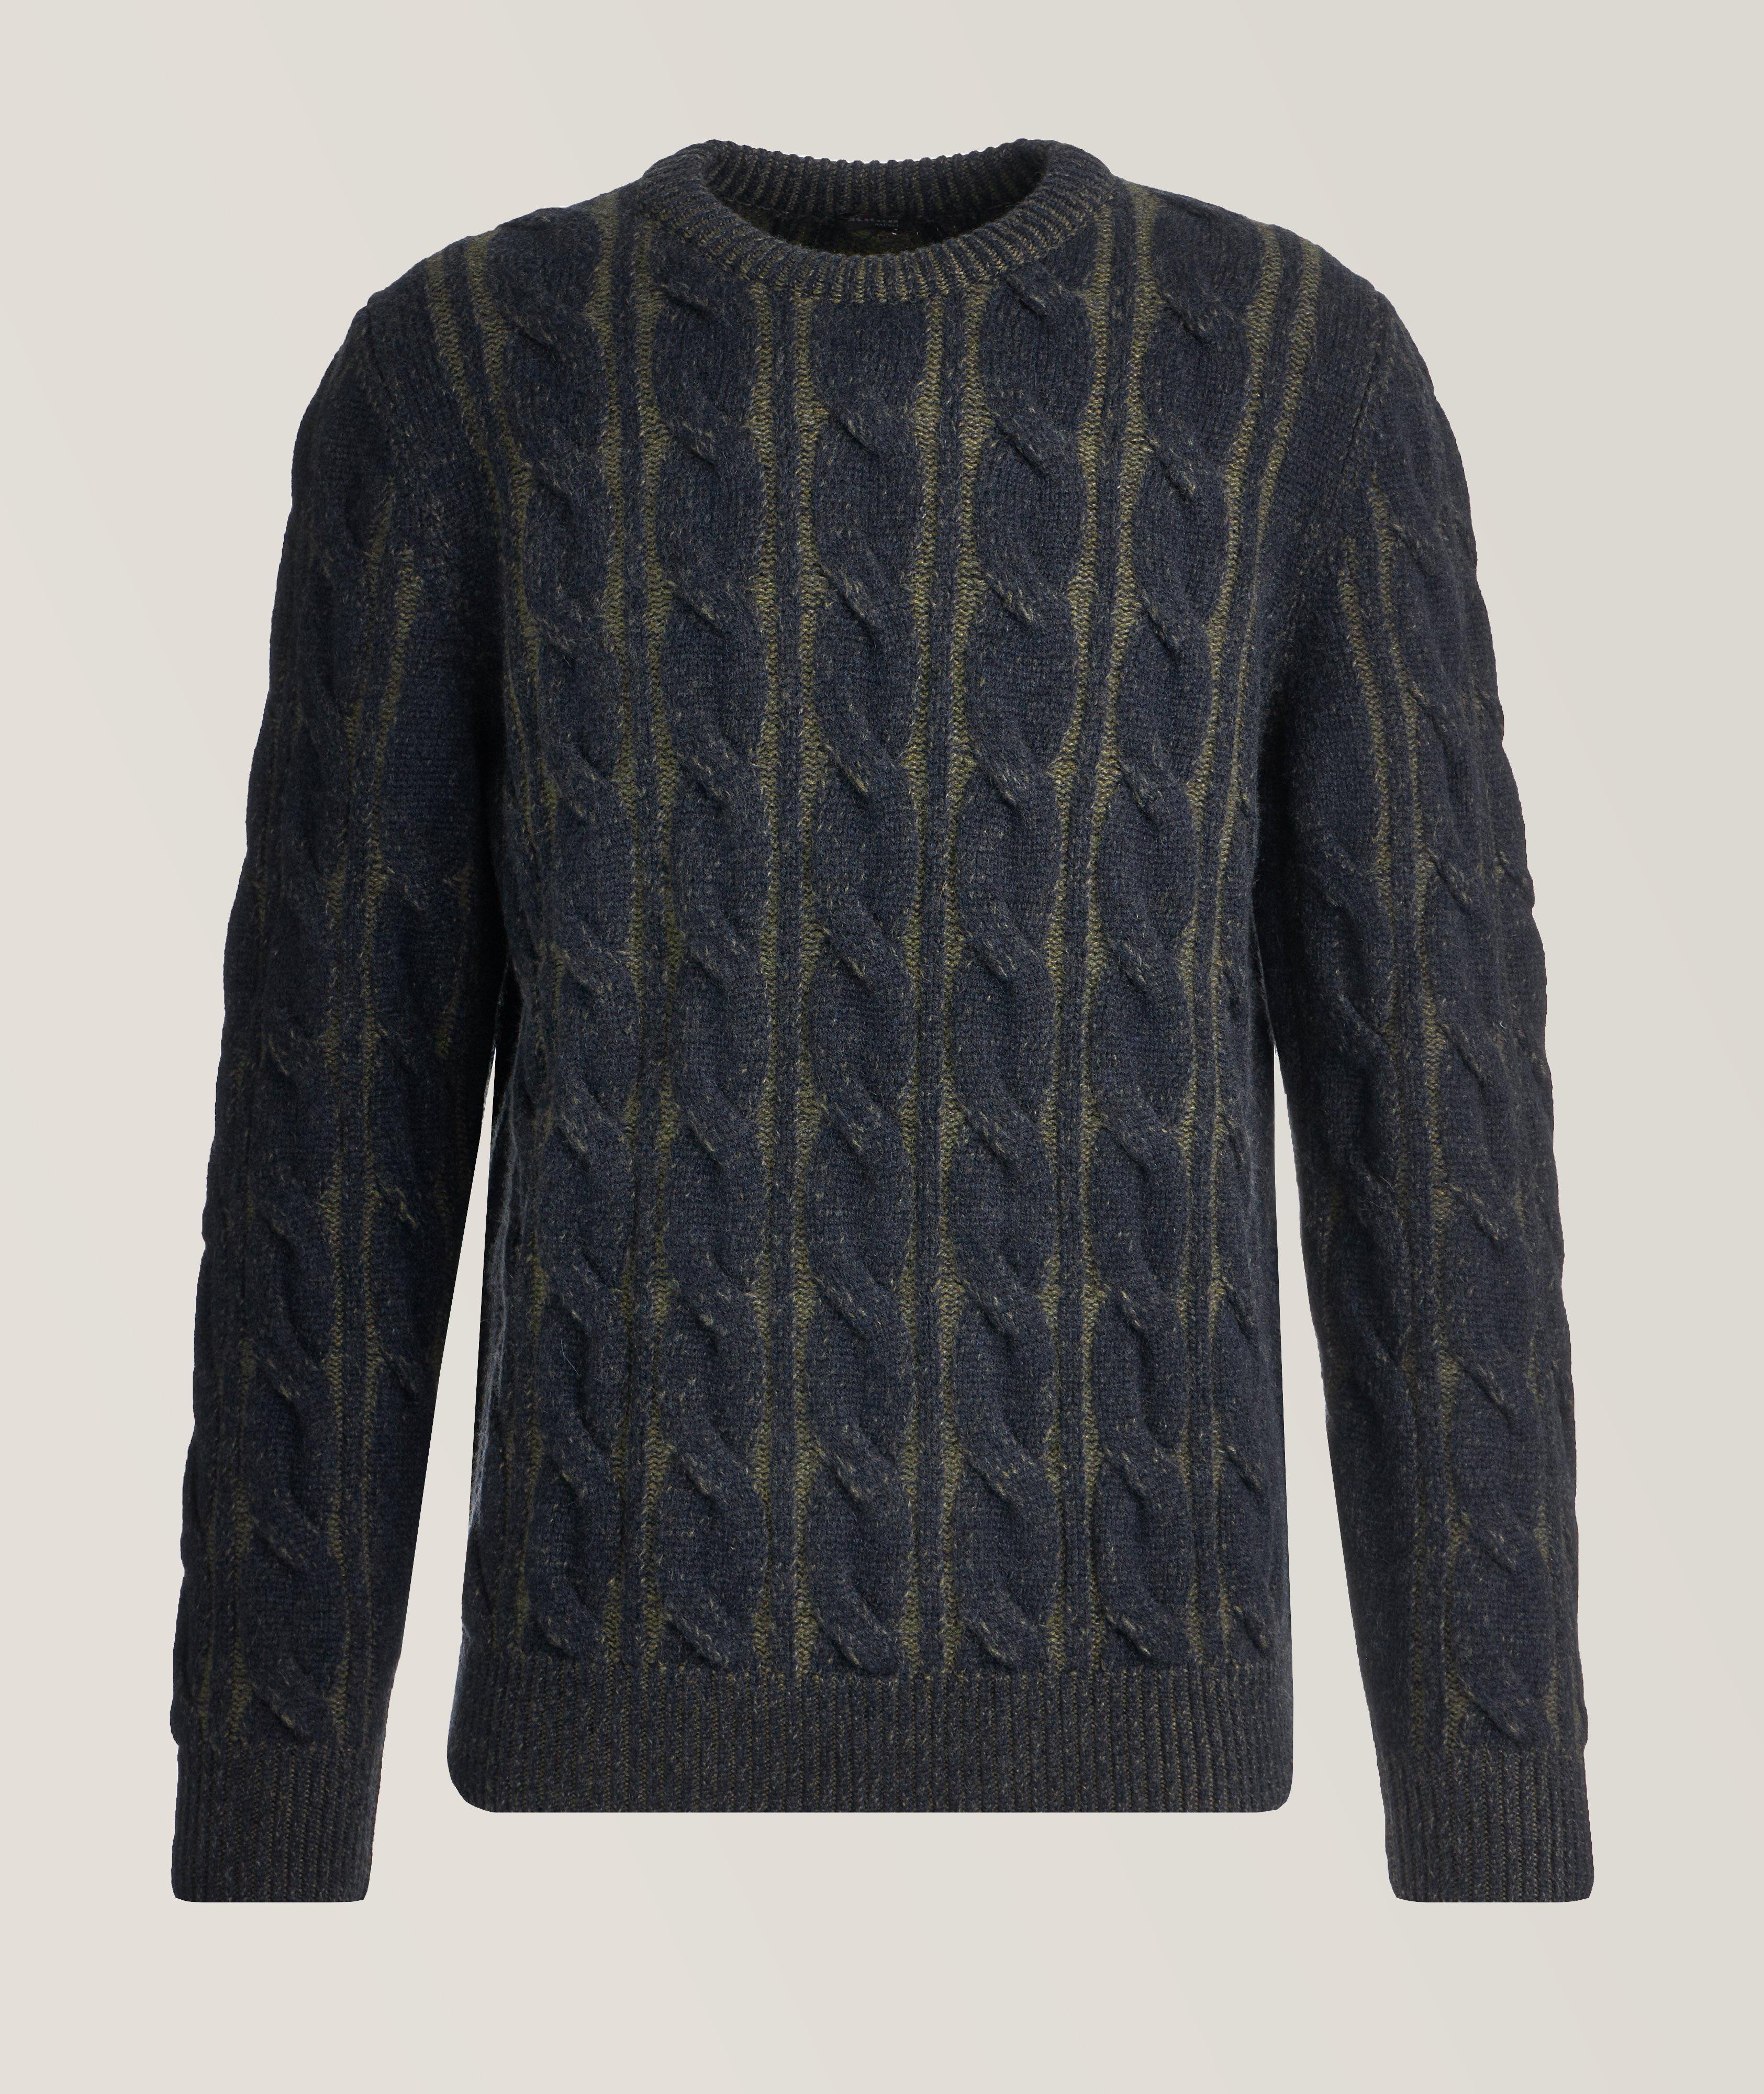 Vanise Cashmere Cable Knit Sweater image 0